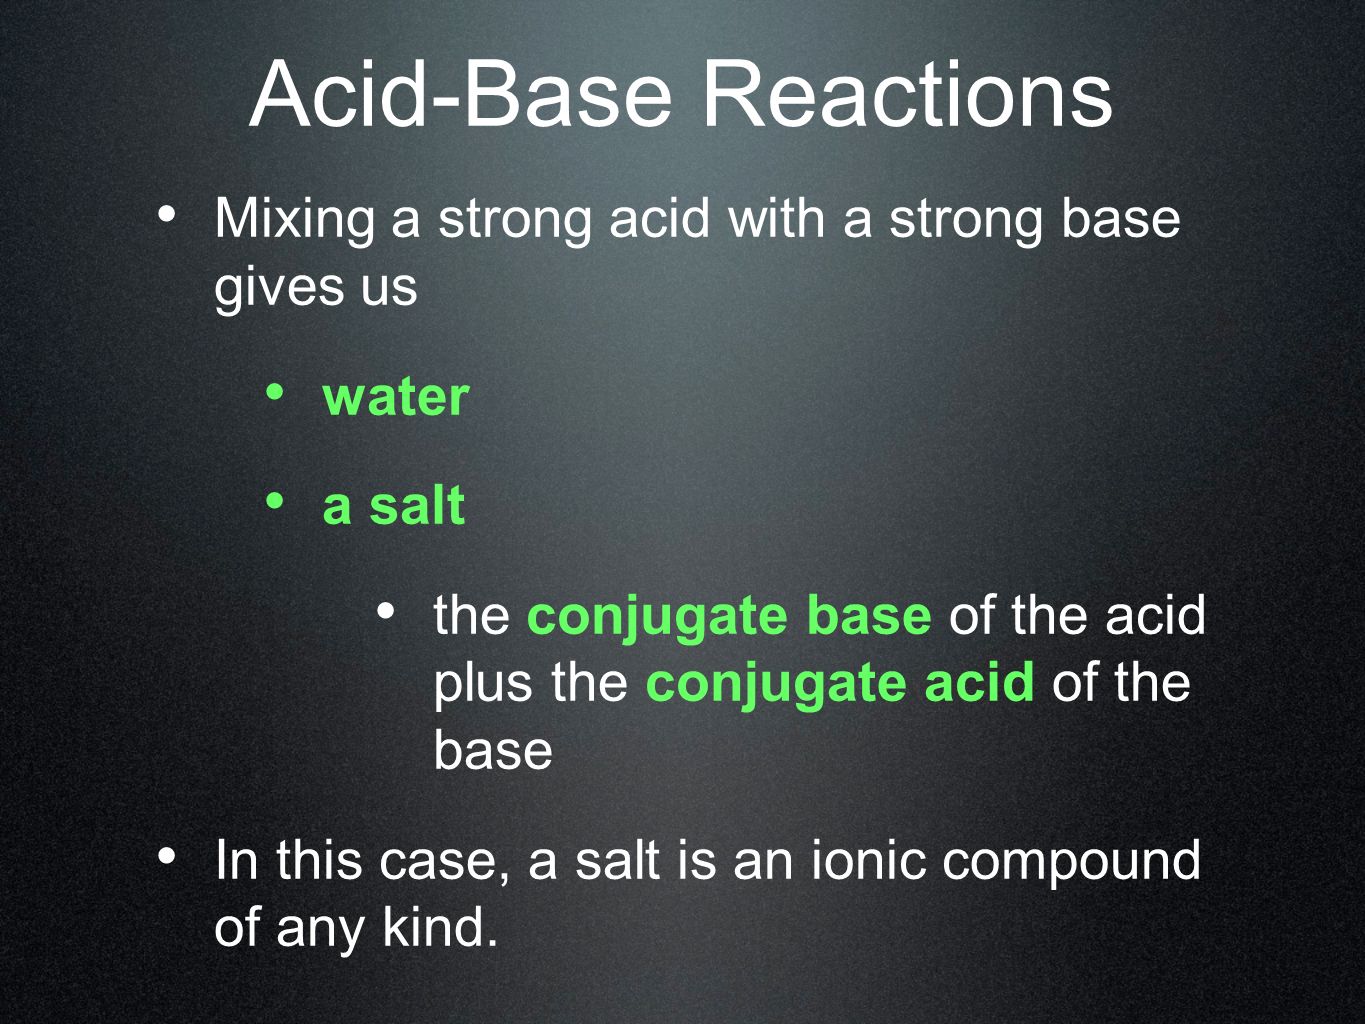 Acid-Base Reactions Mixing a strong acid with a strong base gives us